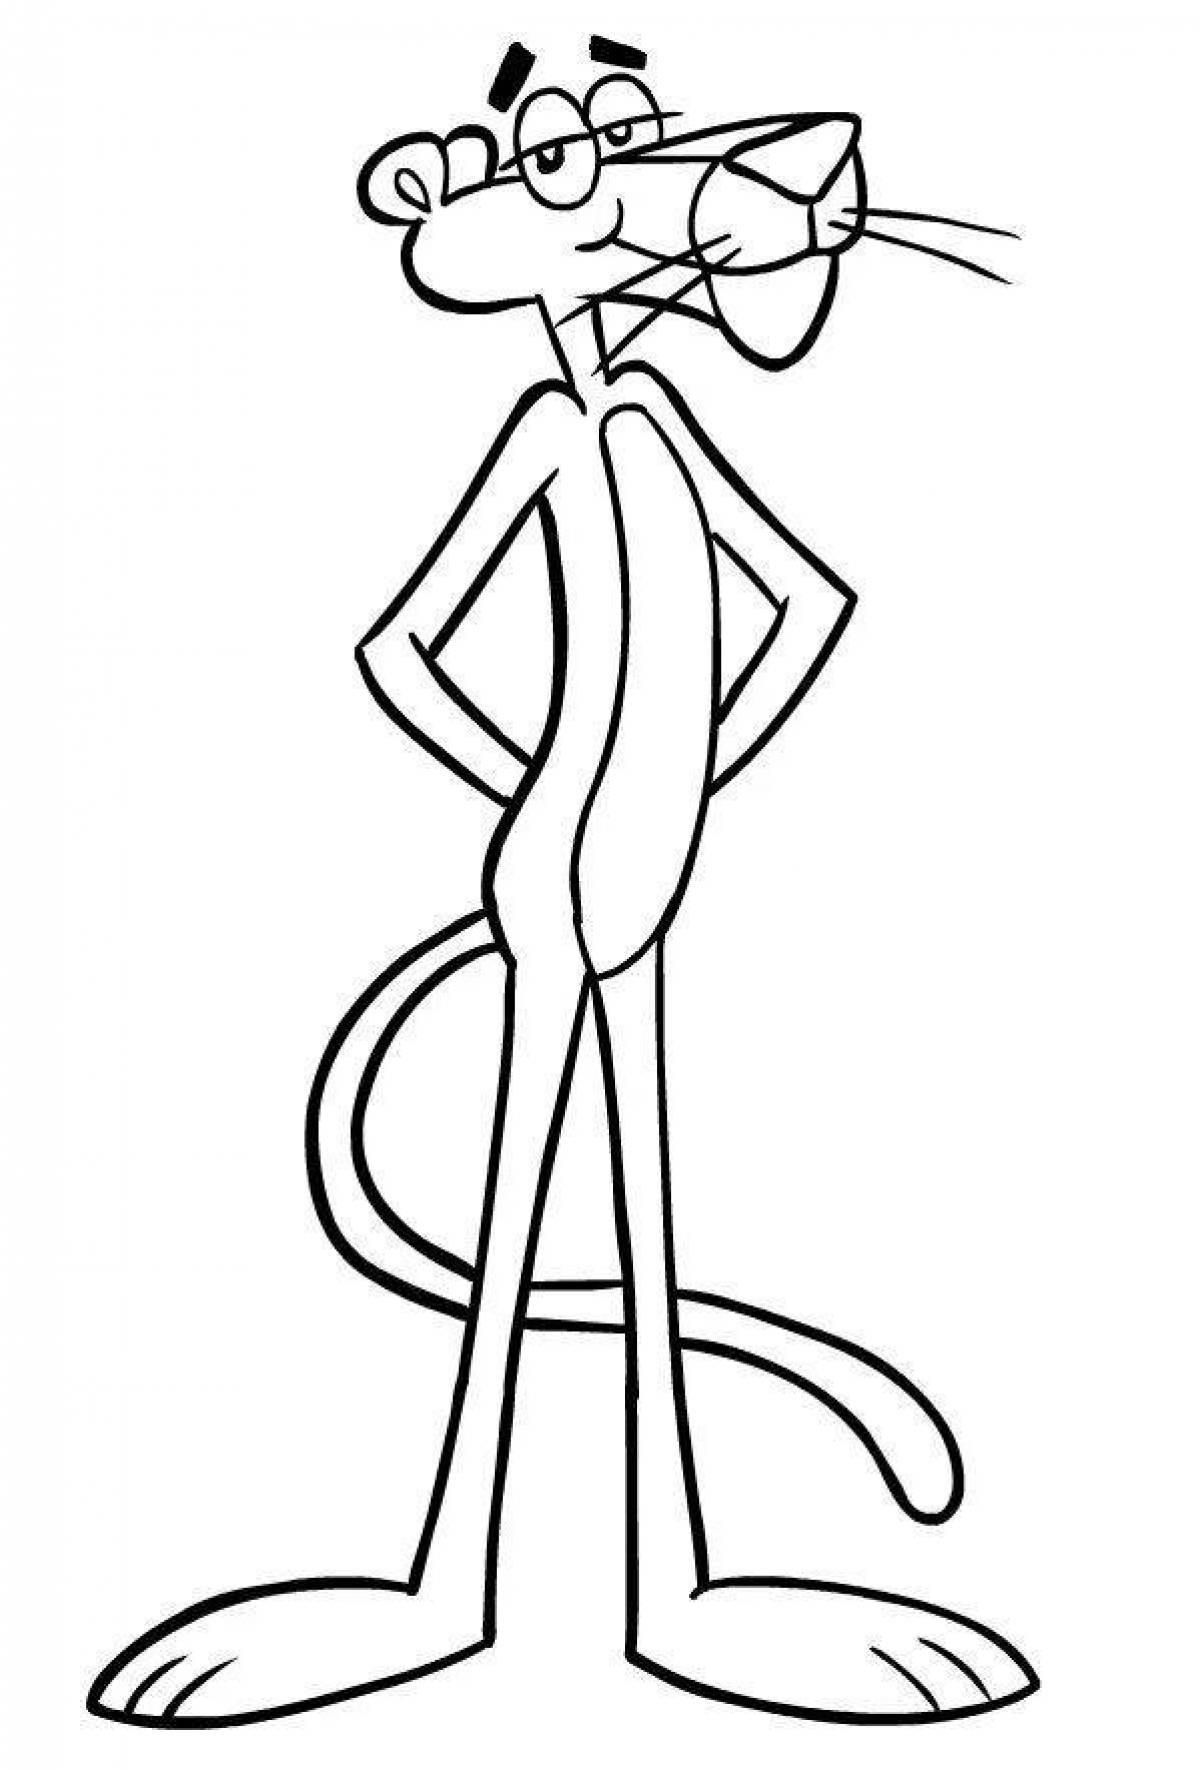 Dazzling pink panther coloring page